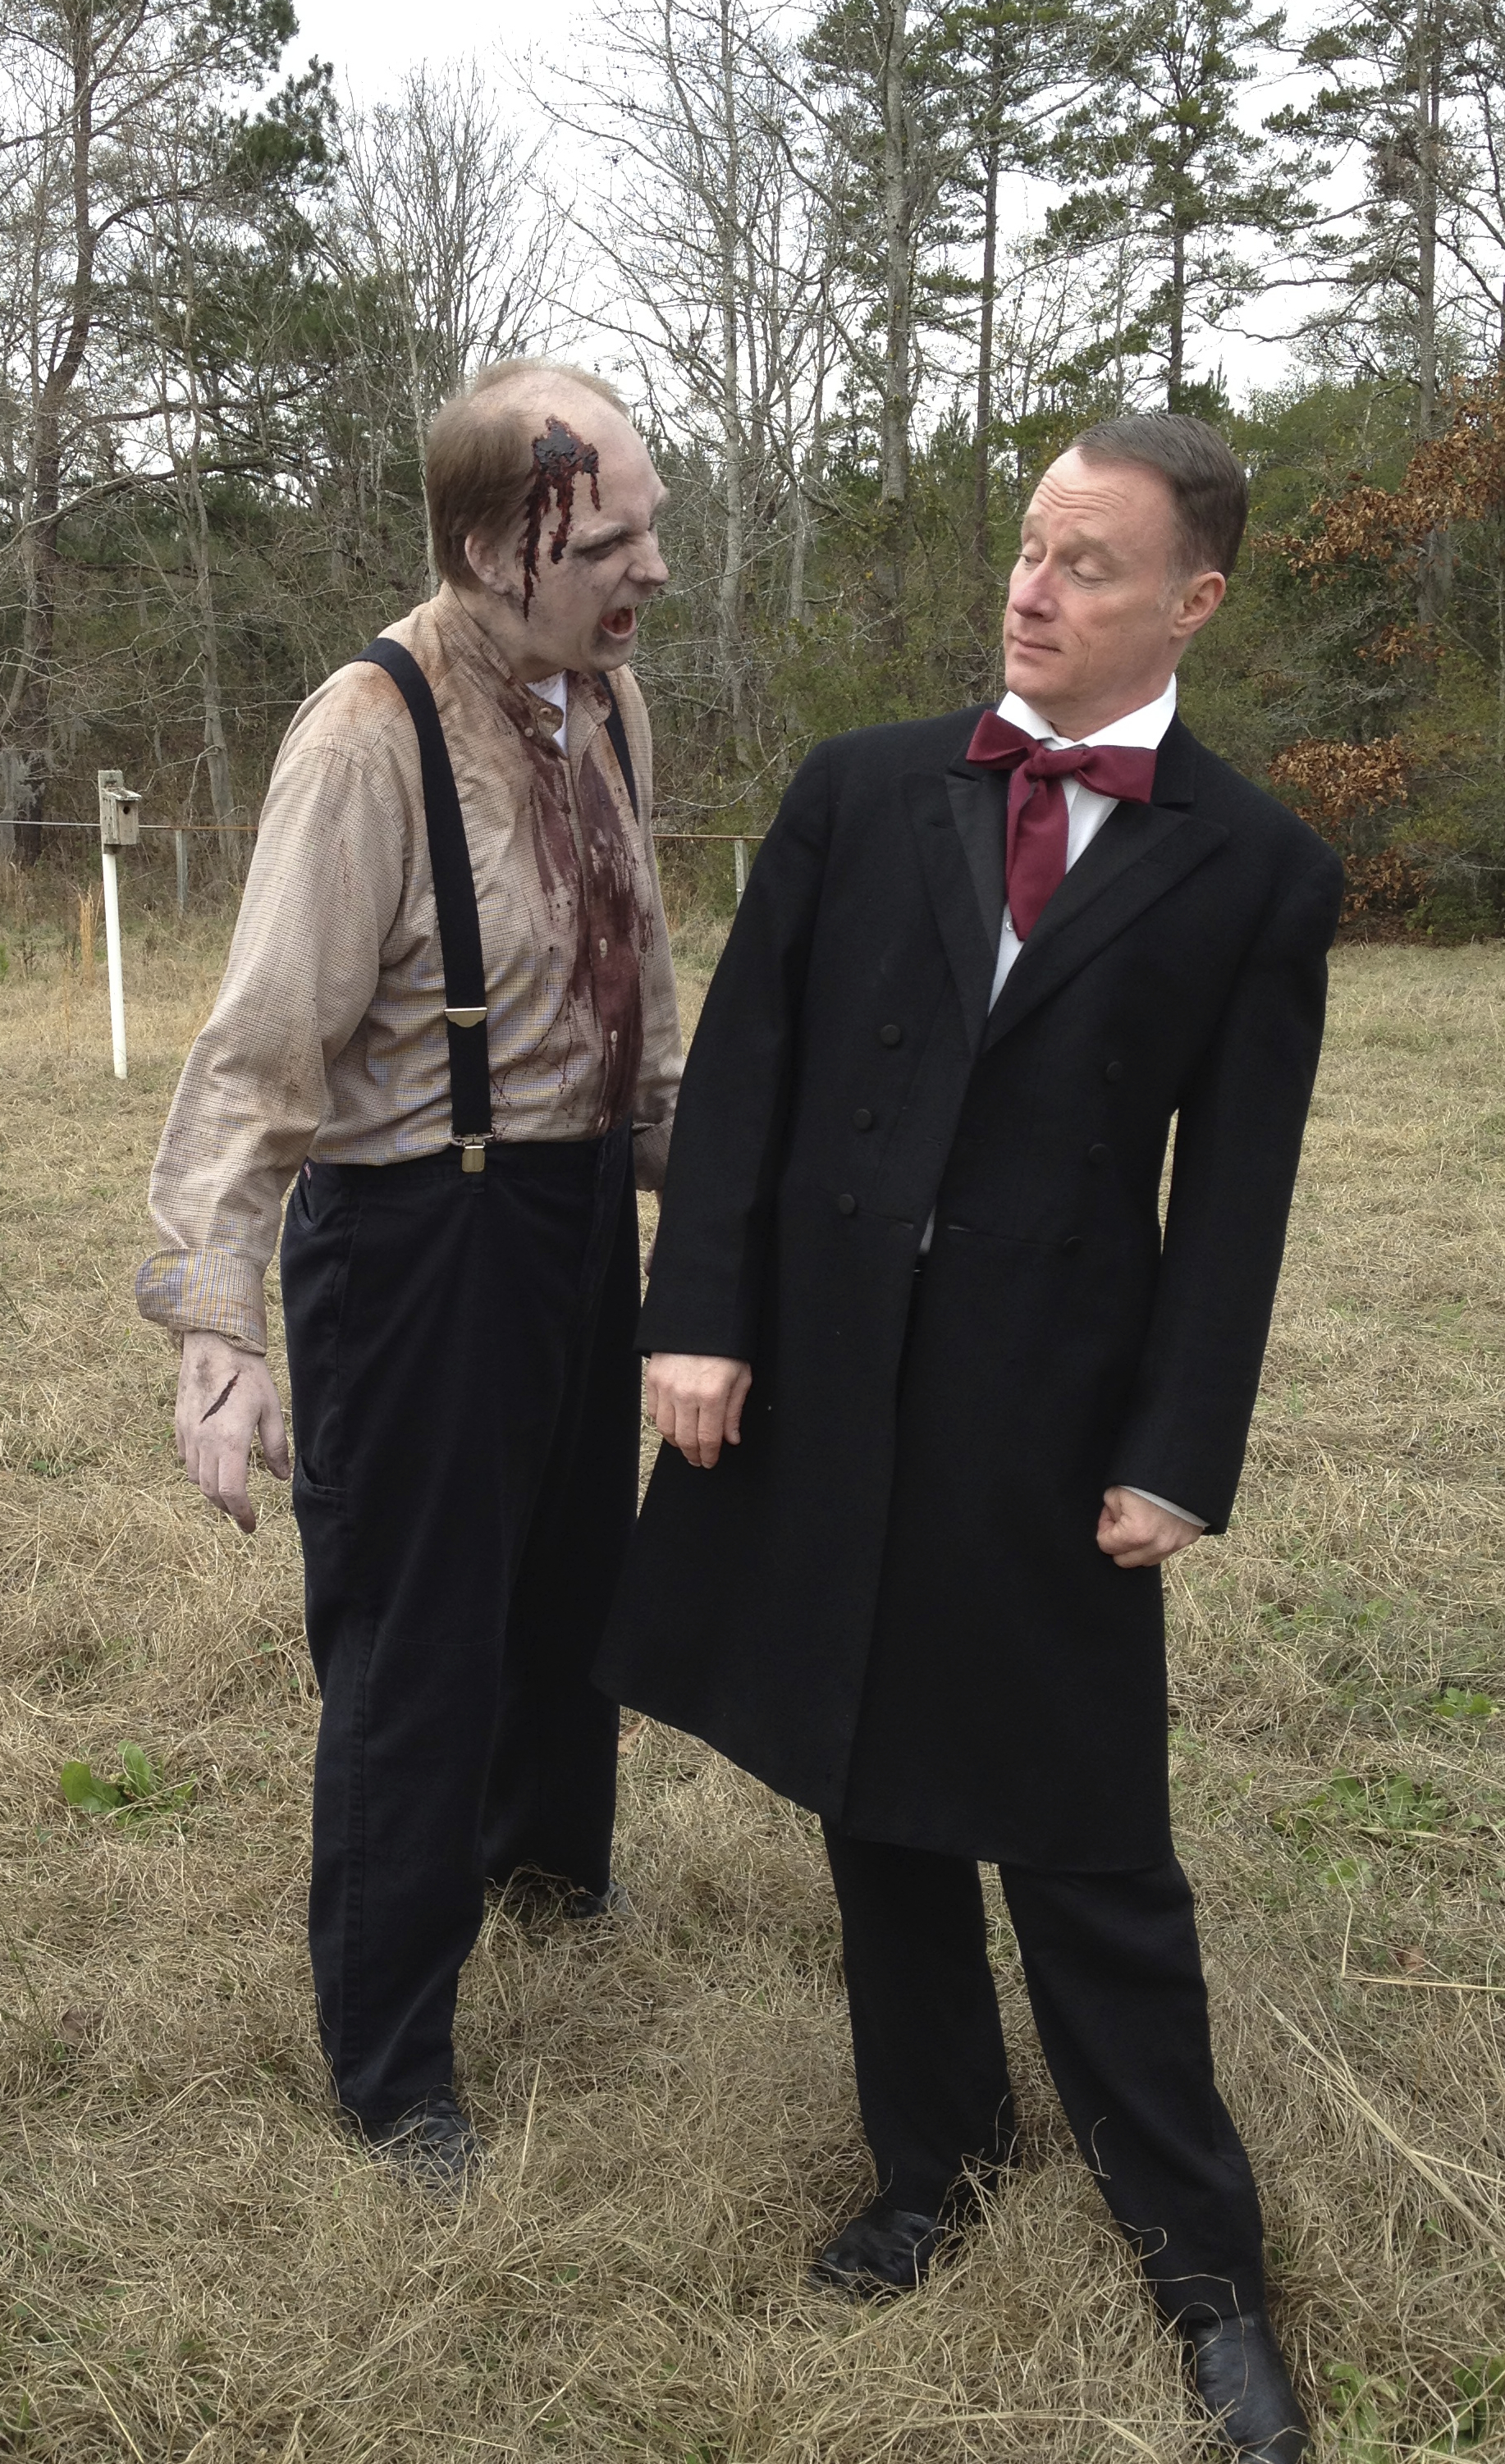 On the set of 'Abraham Lincoln' vs Zombies.